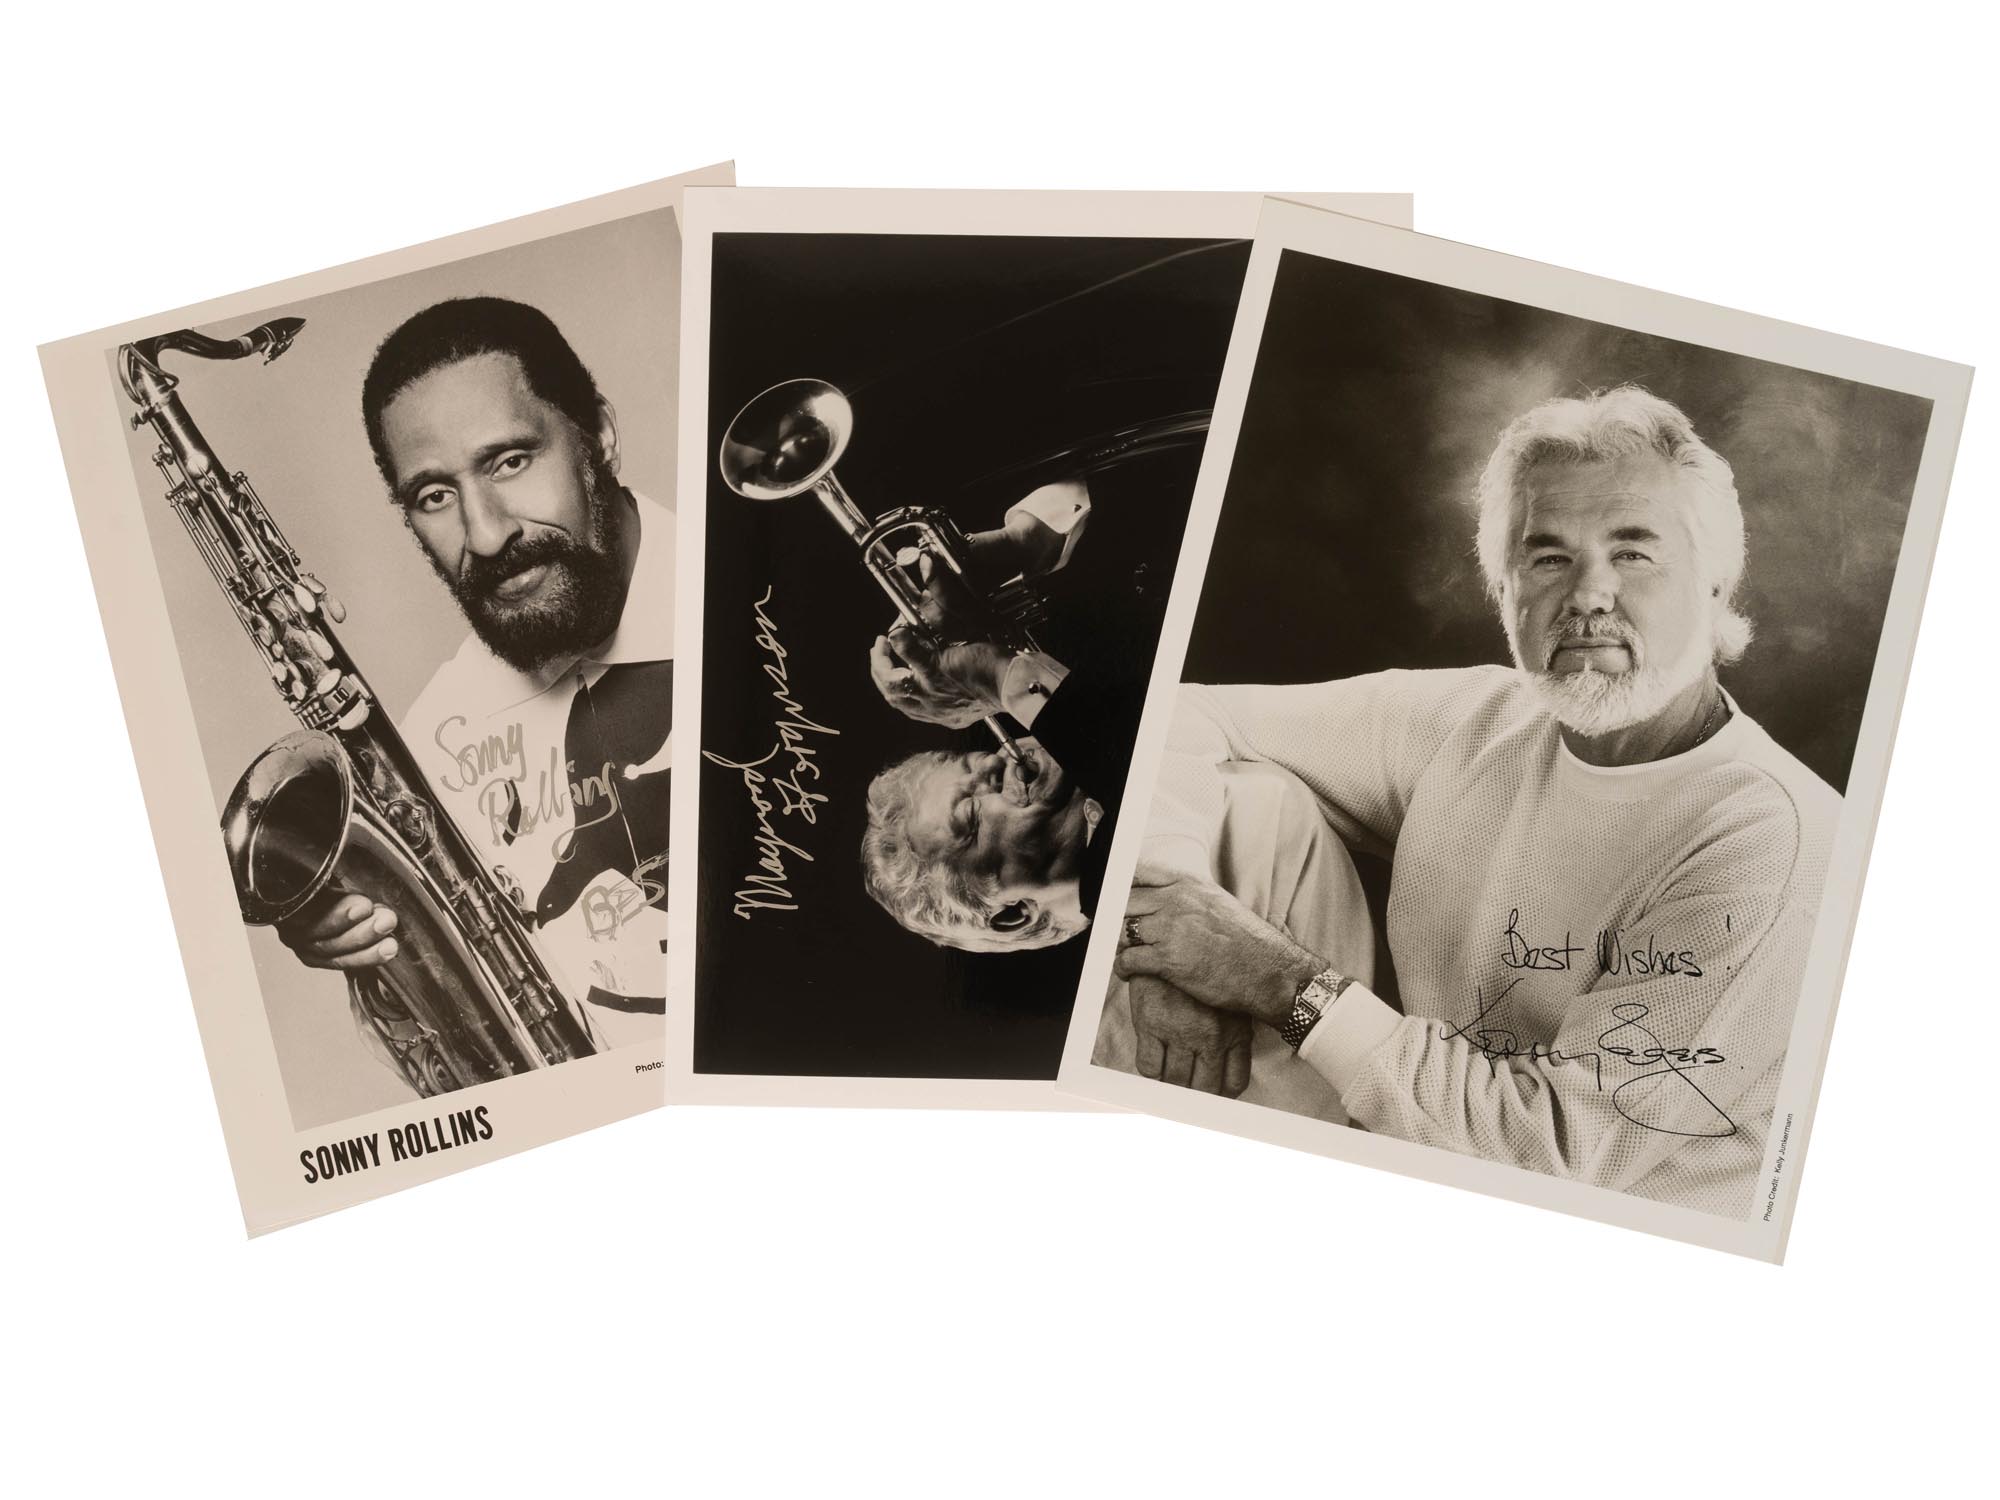 FAMOUS JAZZ MUSICIANS AND ACTOR PHOTO AUTOGRAPHS PIC-0